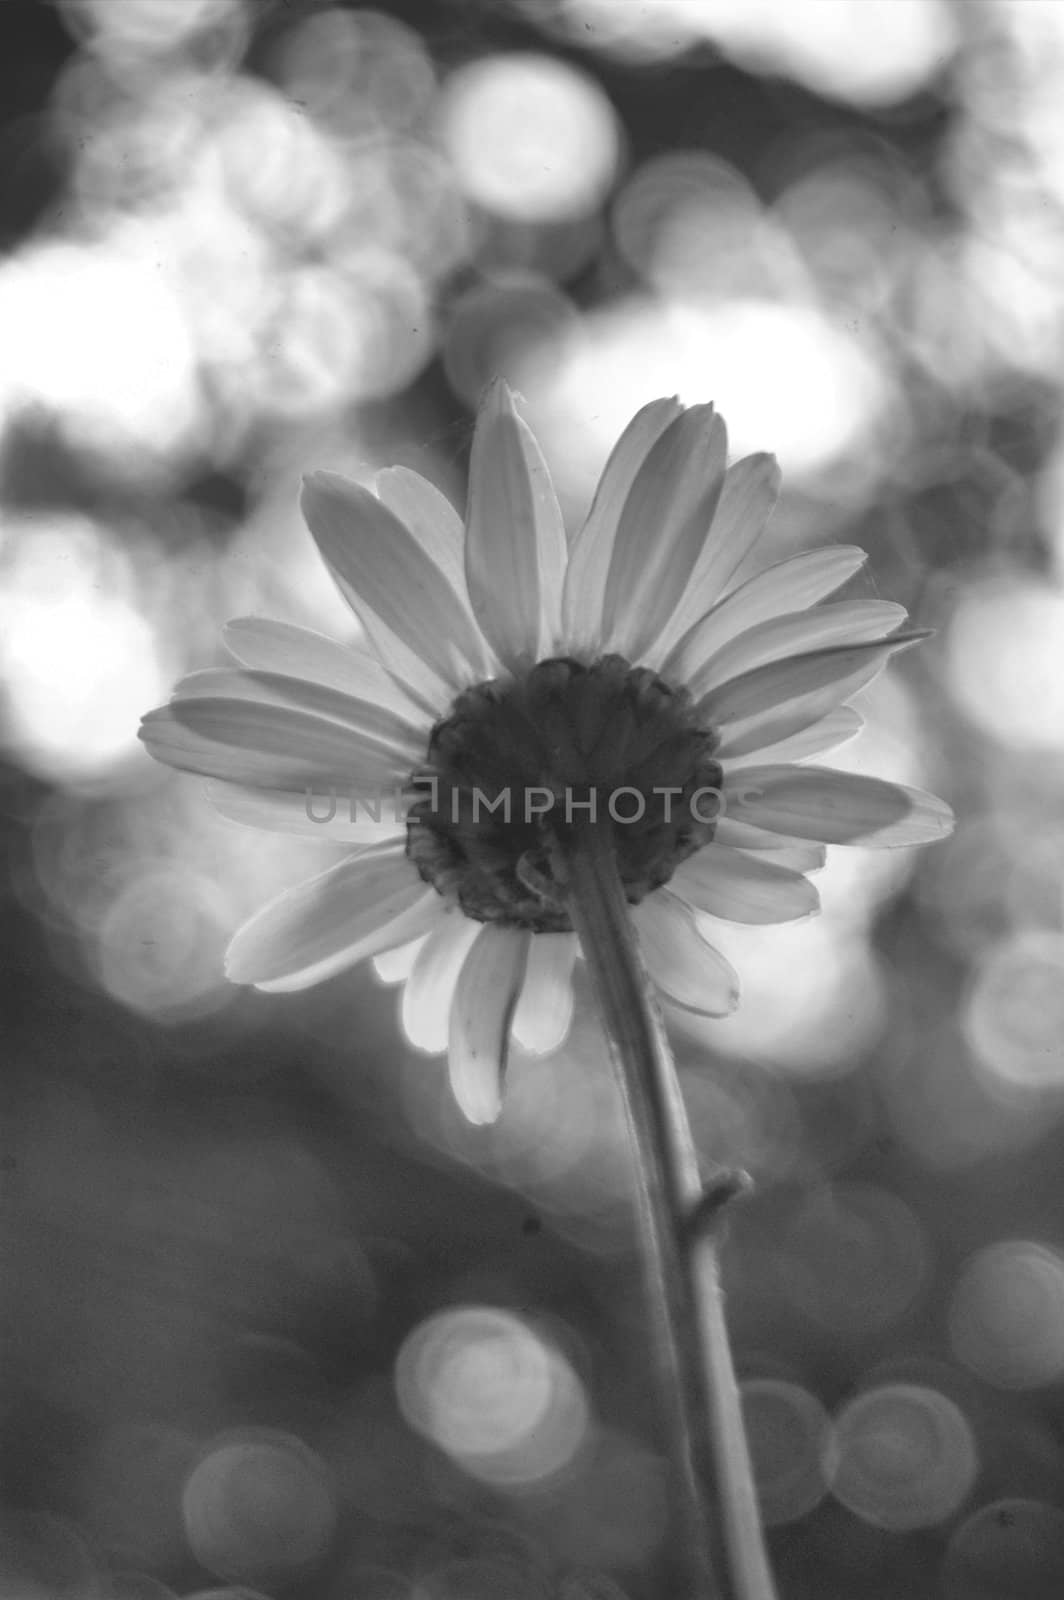 Abstrct daisy in black and white, shot from behind